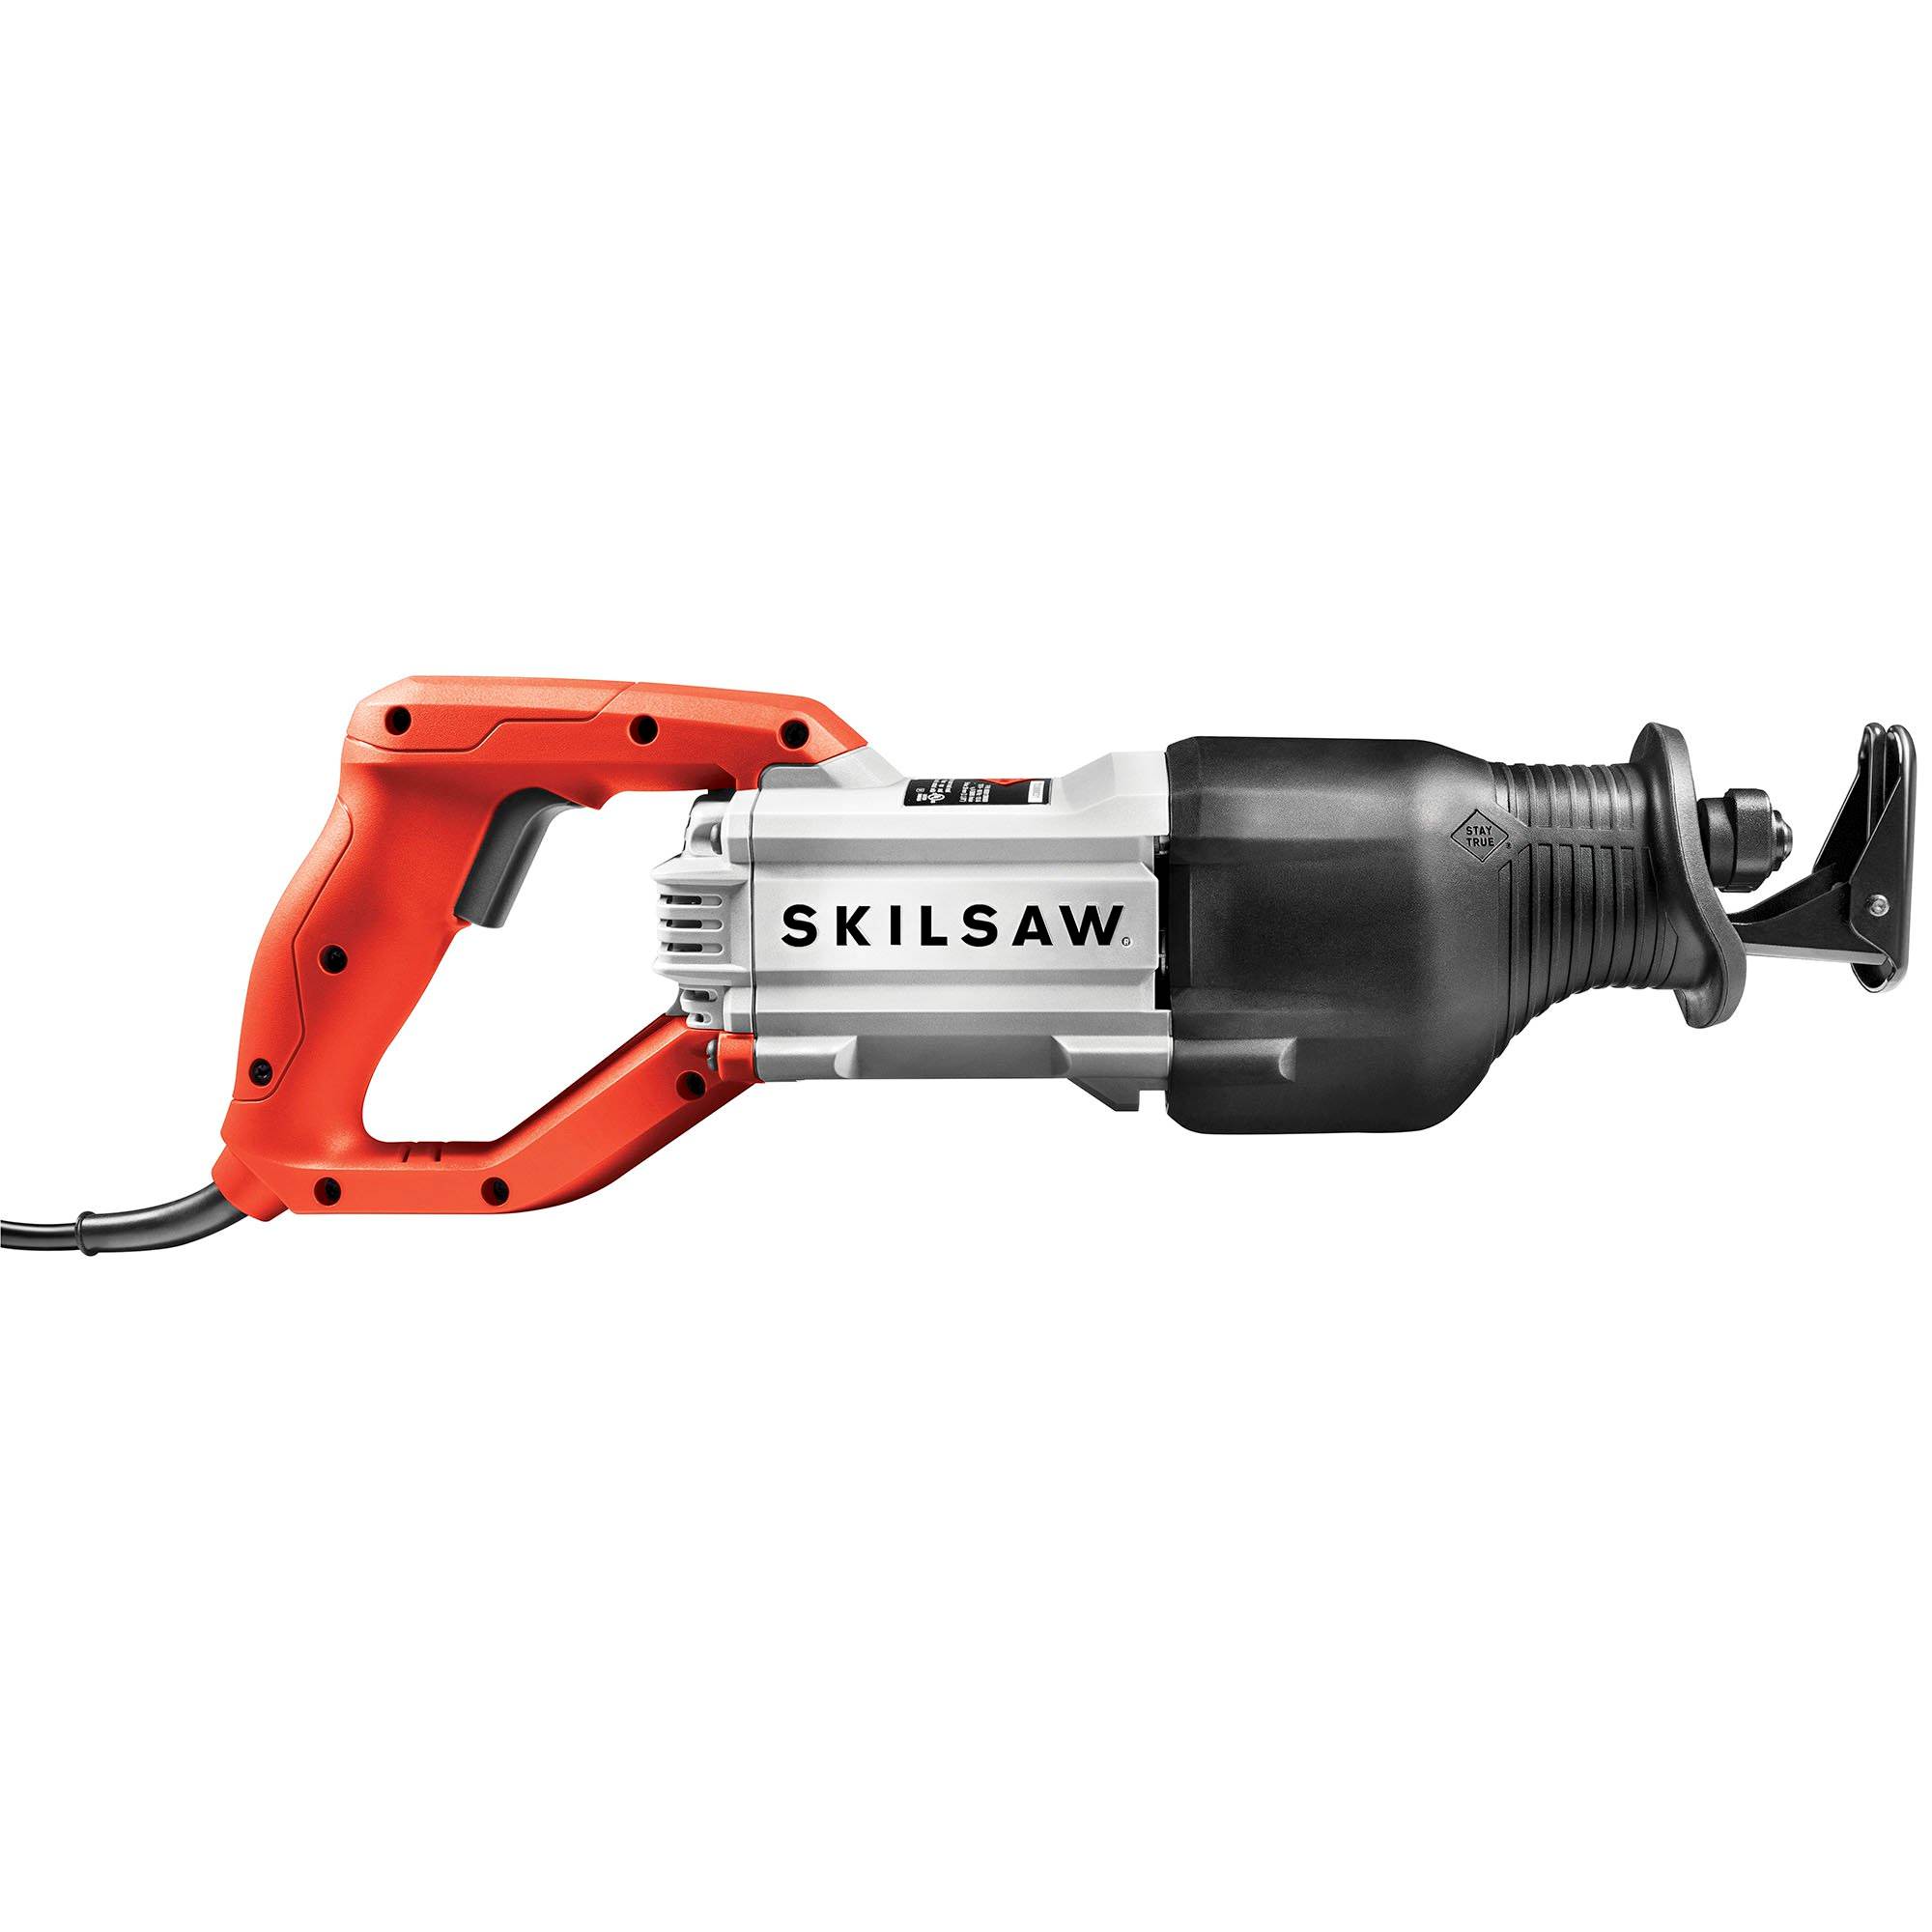 SKILSAW 13-Amp Reciprocating Saw with Buzzkill Technology, SPT44A-00 - image 1 of 8